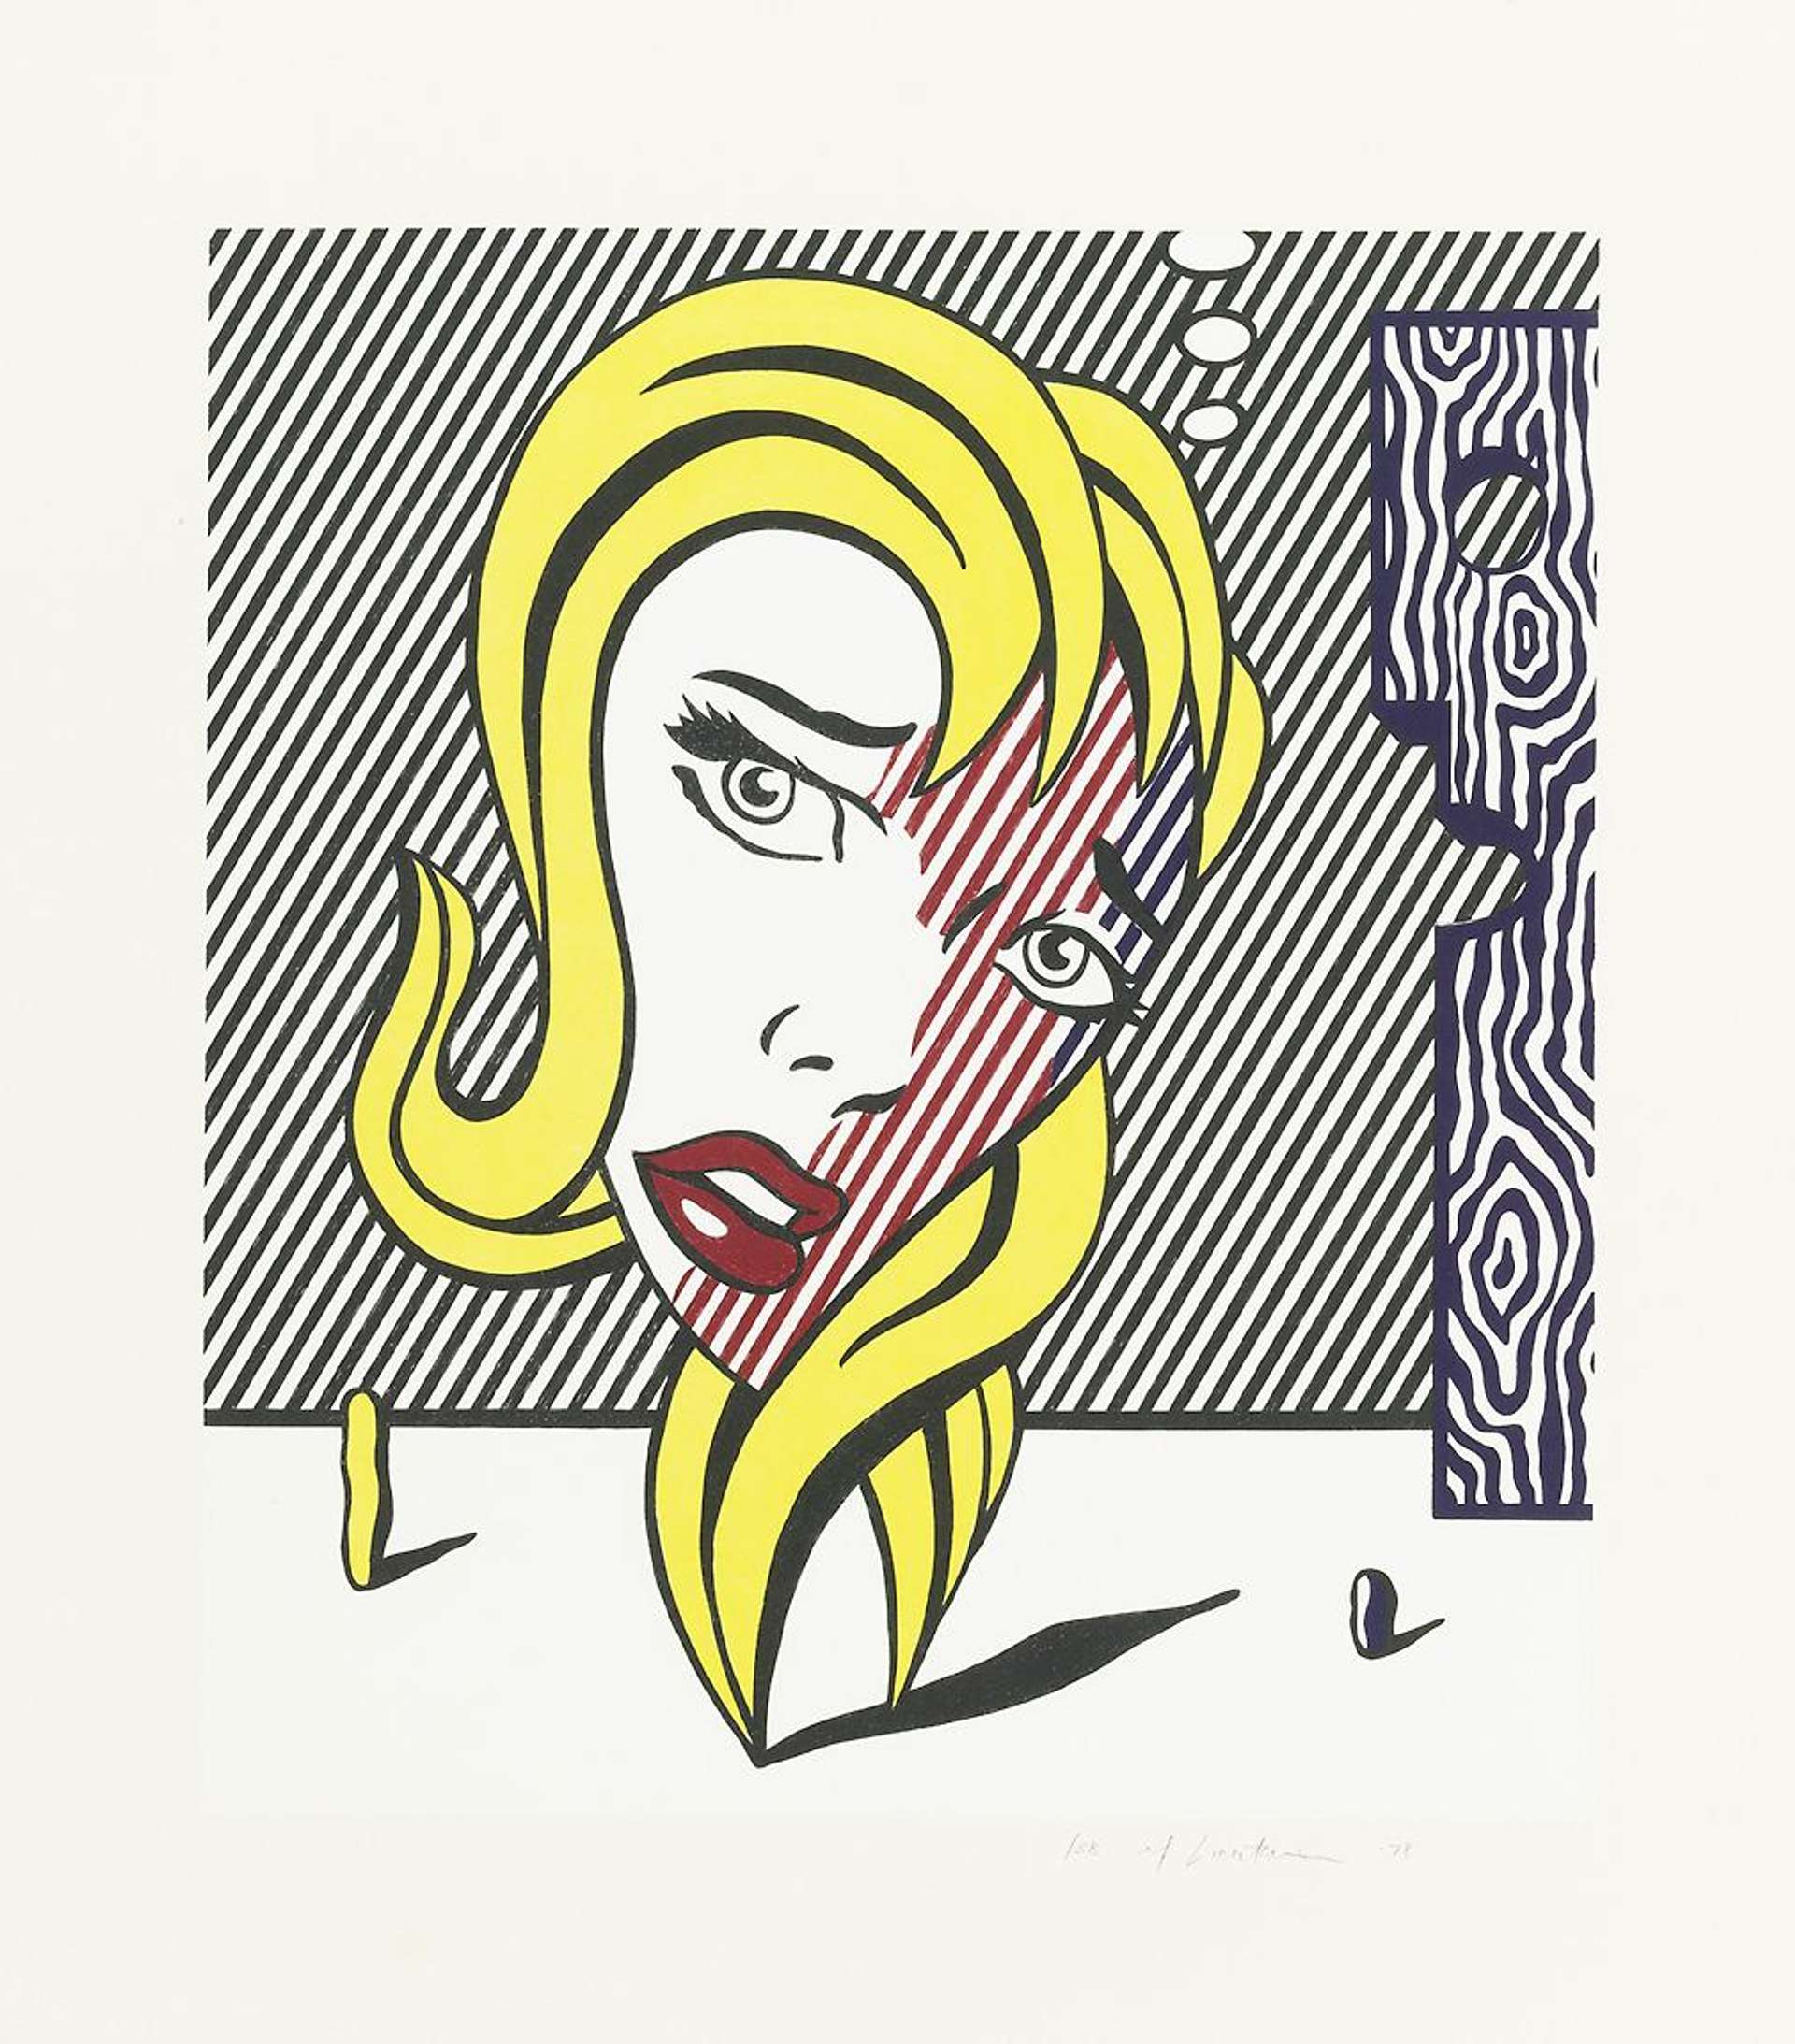 A female face in a state of emotional turmoil, with her body composed entirely out of blonde streaks of hair. Rendered in bright yellow and red hues, the figure’s contours are offset by crisp areas of black and white. A faux-wood statue, appropriated from Lichtenstein’s American Indian series of the 1980s, watches her tearful voyage from a distance.